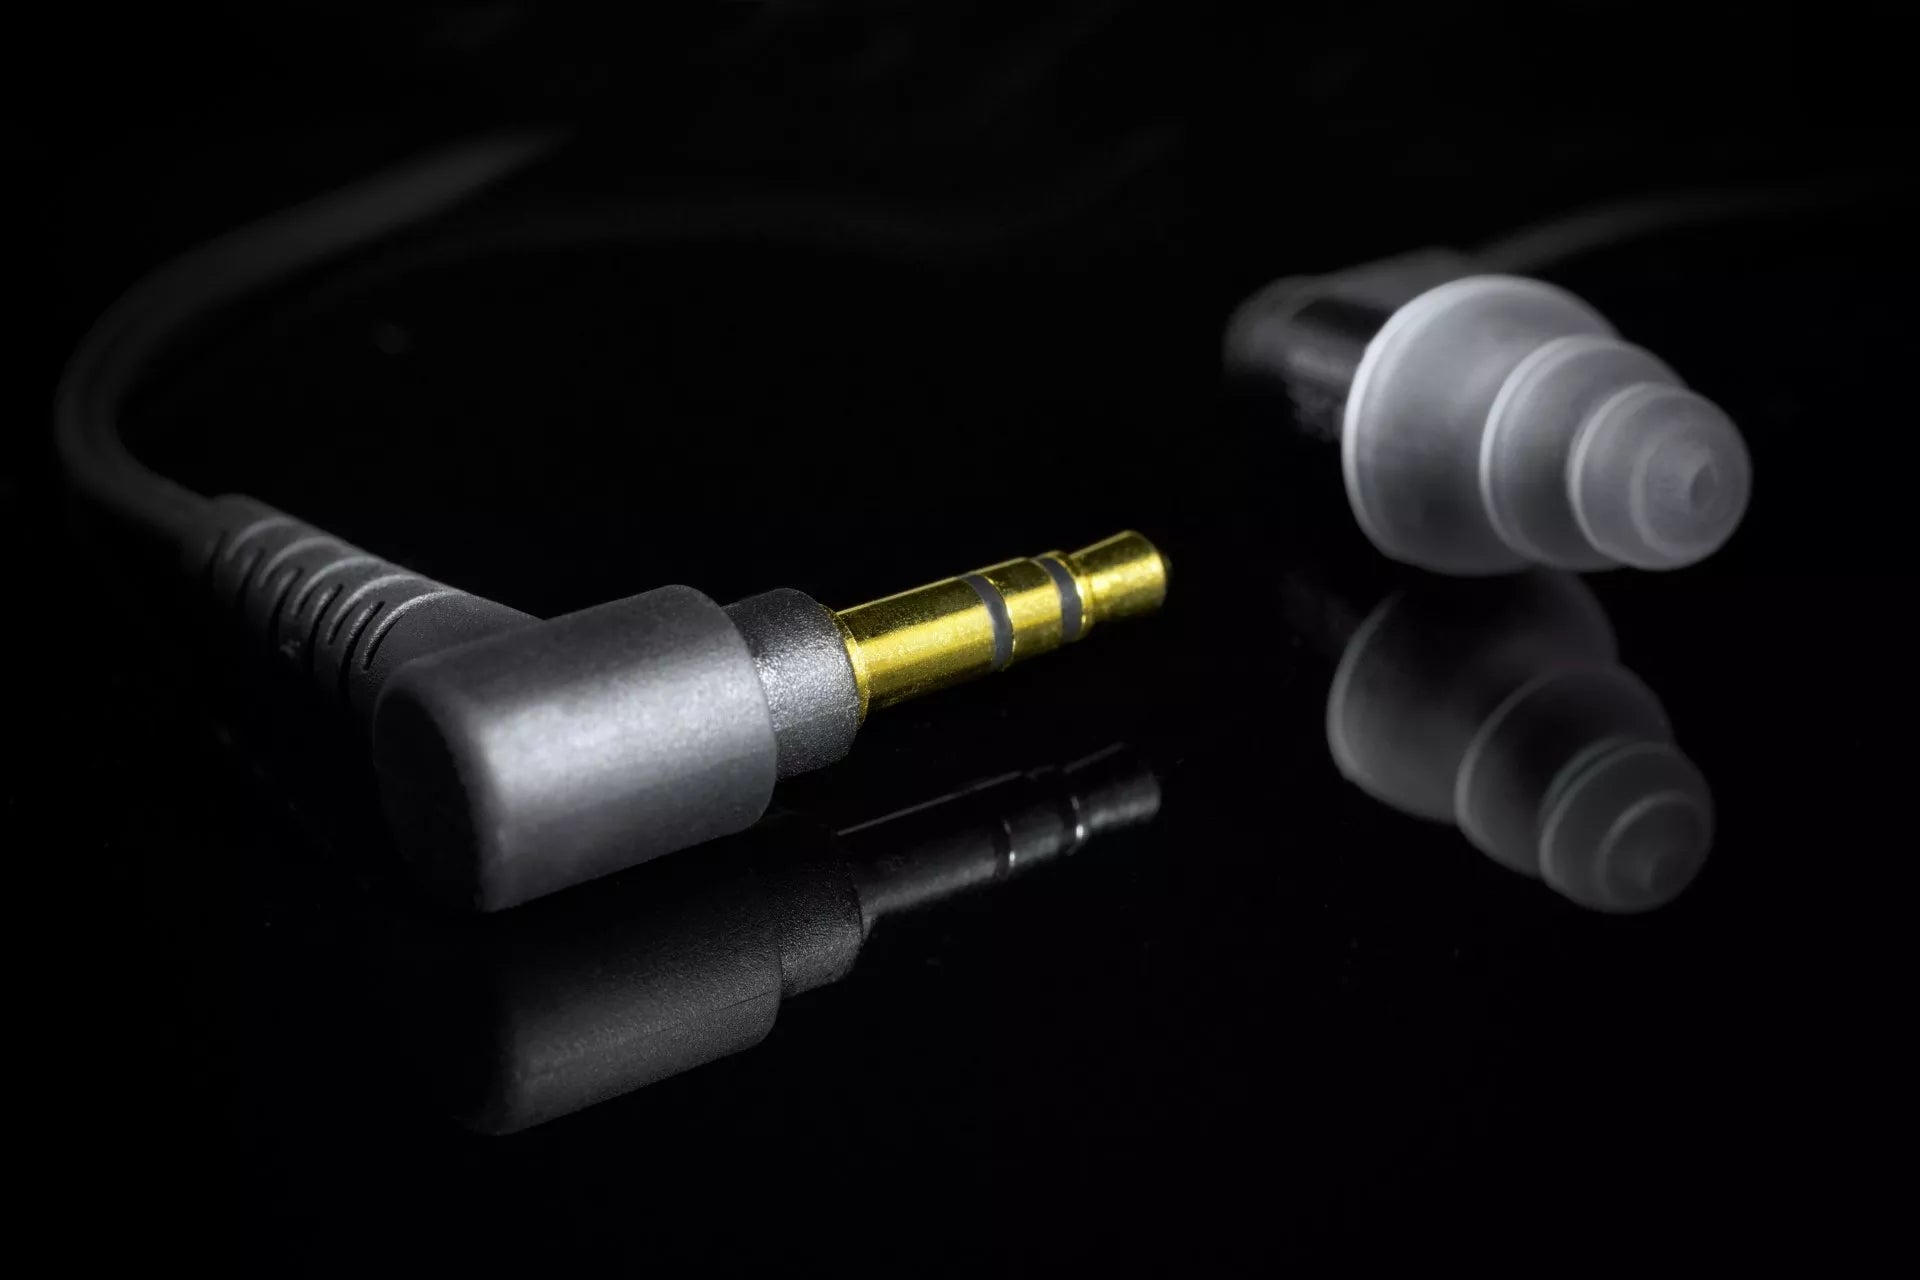 Etymotic ER3 - In Ear Isolating Earphones with Detachable Cable